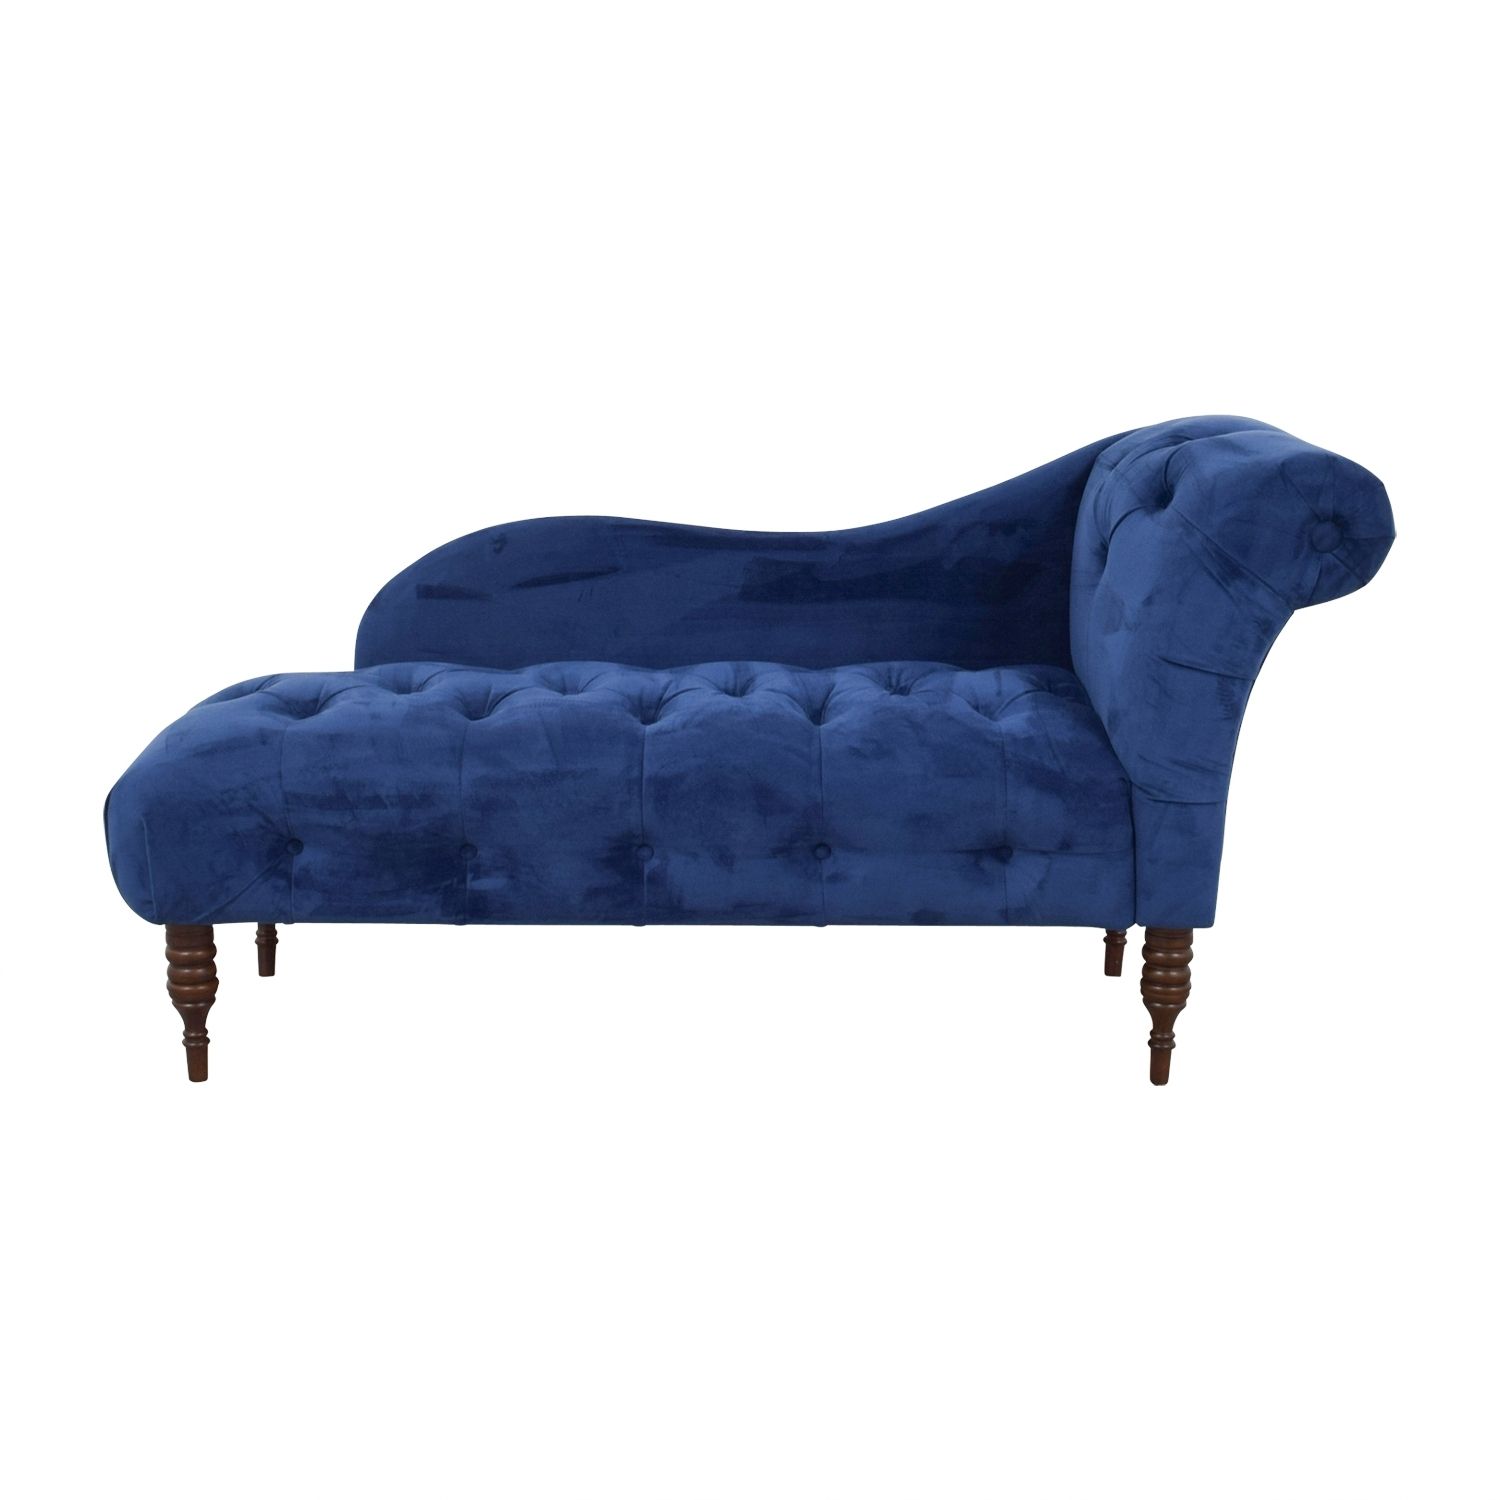 [%39% Off – One Kings Lane One Kings Lane Abbyson Francis Tufted Within Latest Blue Chaises|blue Chaises Throughout 2018 39% Off – One Kings Lane One Kings Lane Abbyson Francis Tufted|newest Blue Chaises With Regard To 39% Off – One Kings Lane One Kings Lane Abbyson Francis Tufted|well Known 39% Off – One Kings Lane One Kings Lane Abbyson Francis Tufted Within Blue Chaises%] (Photo 12 of 15)